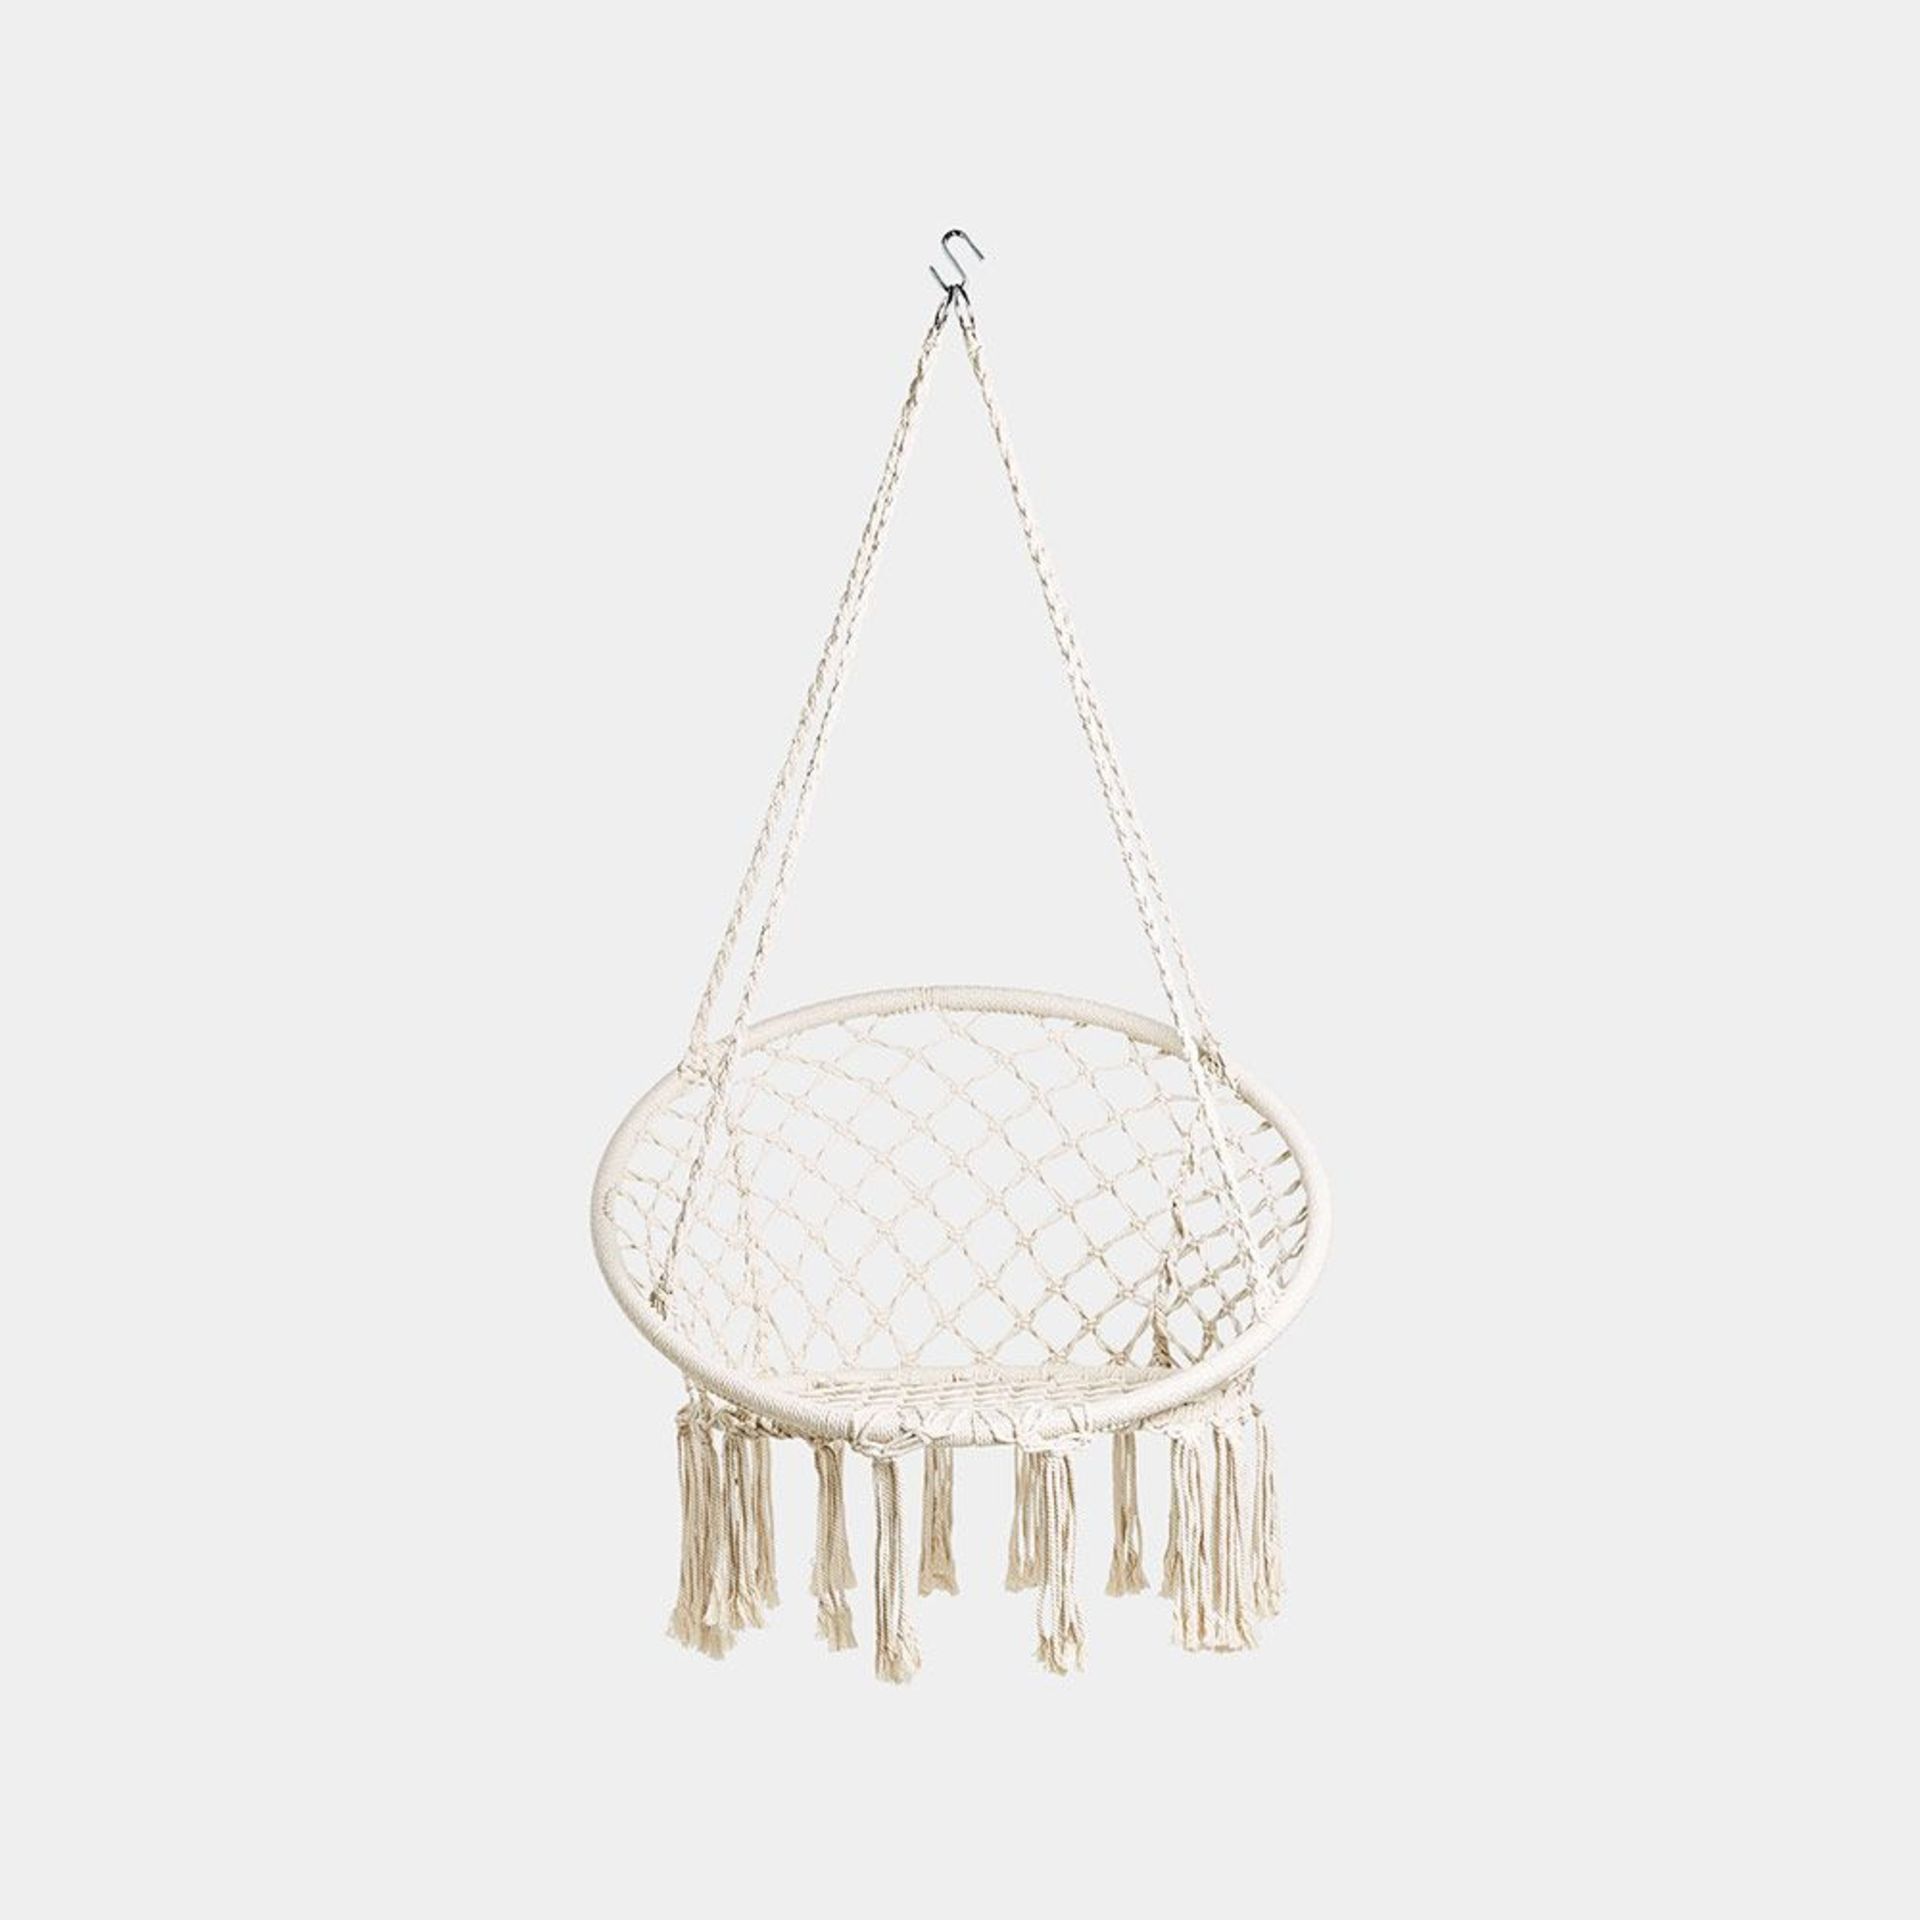 Boho Ivory Rope Hanging Garden Chair. A hanging chair really does have it all: a cocoonlike